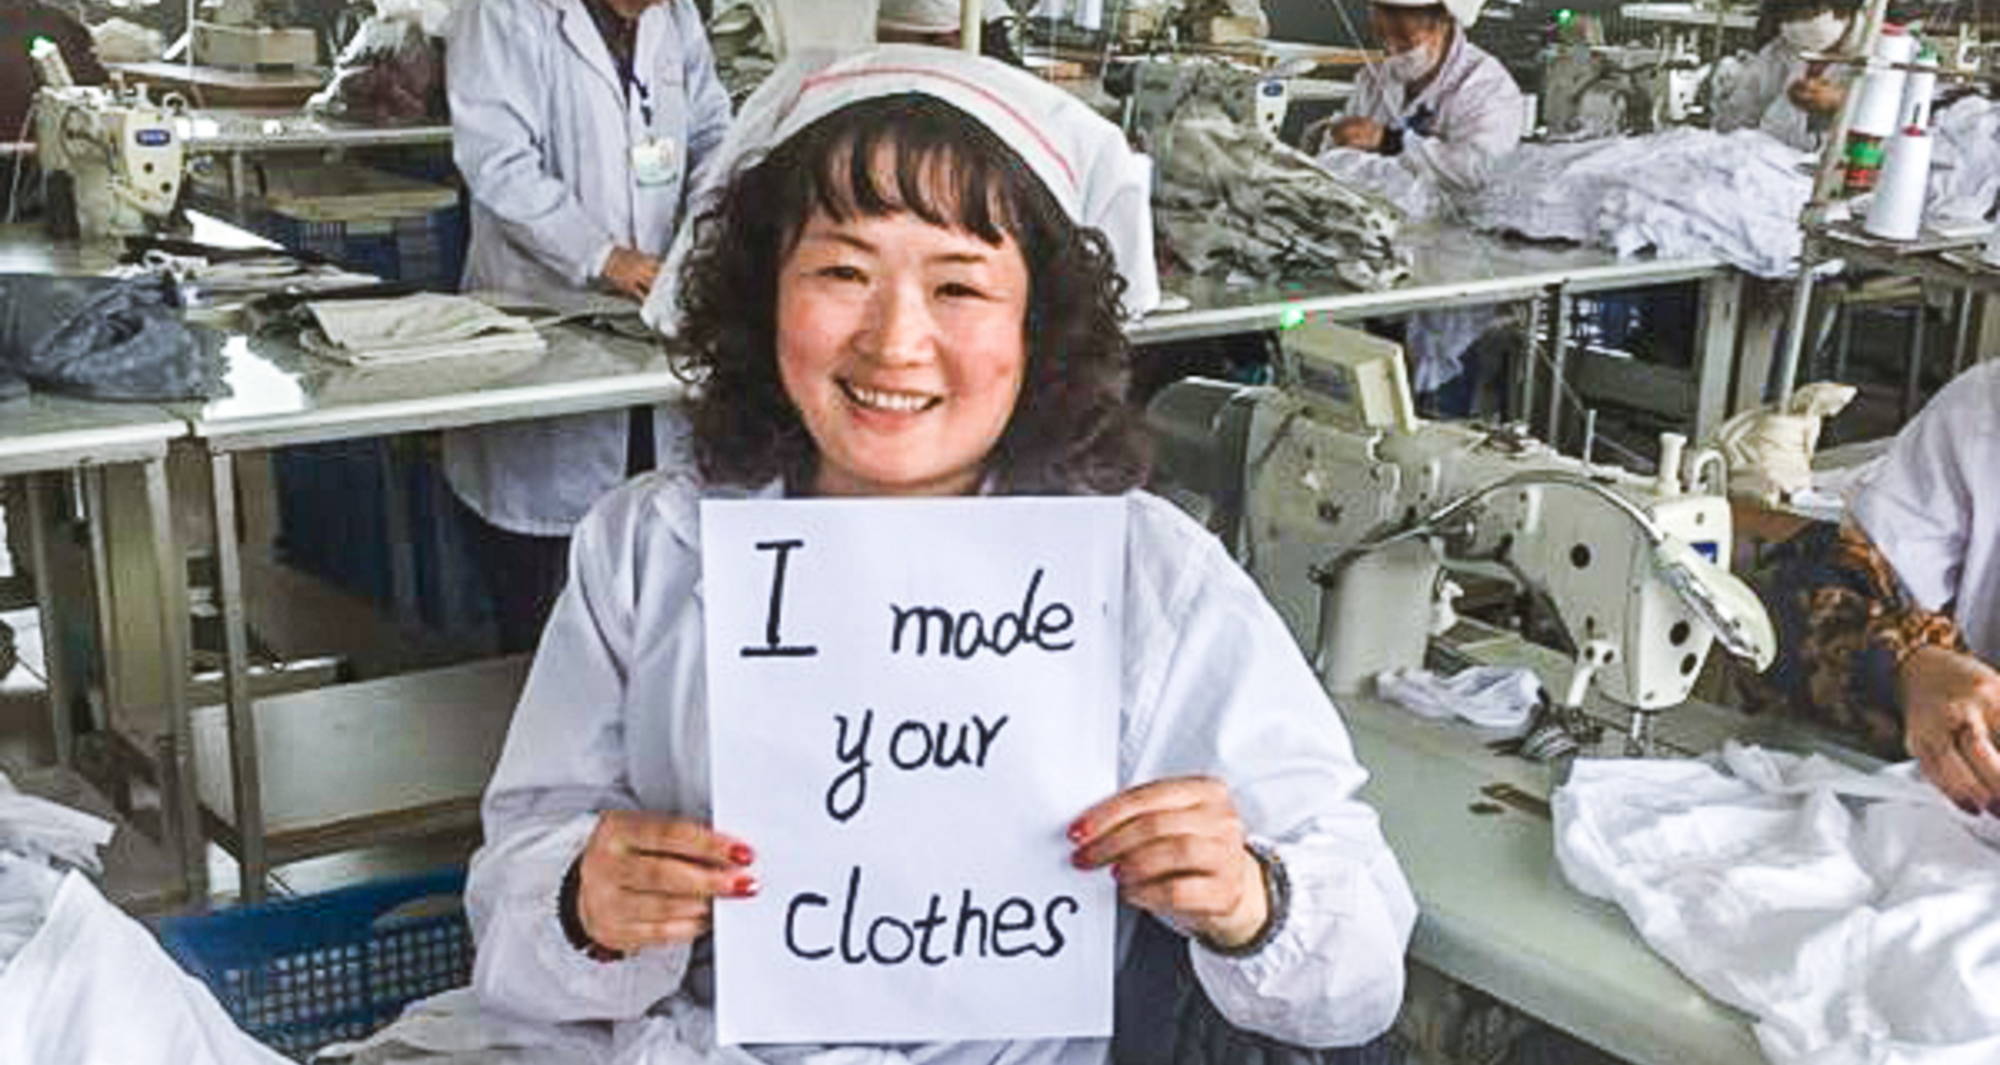 a woman in all white holds a sign that says “I made your clothes” in a clothing factory